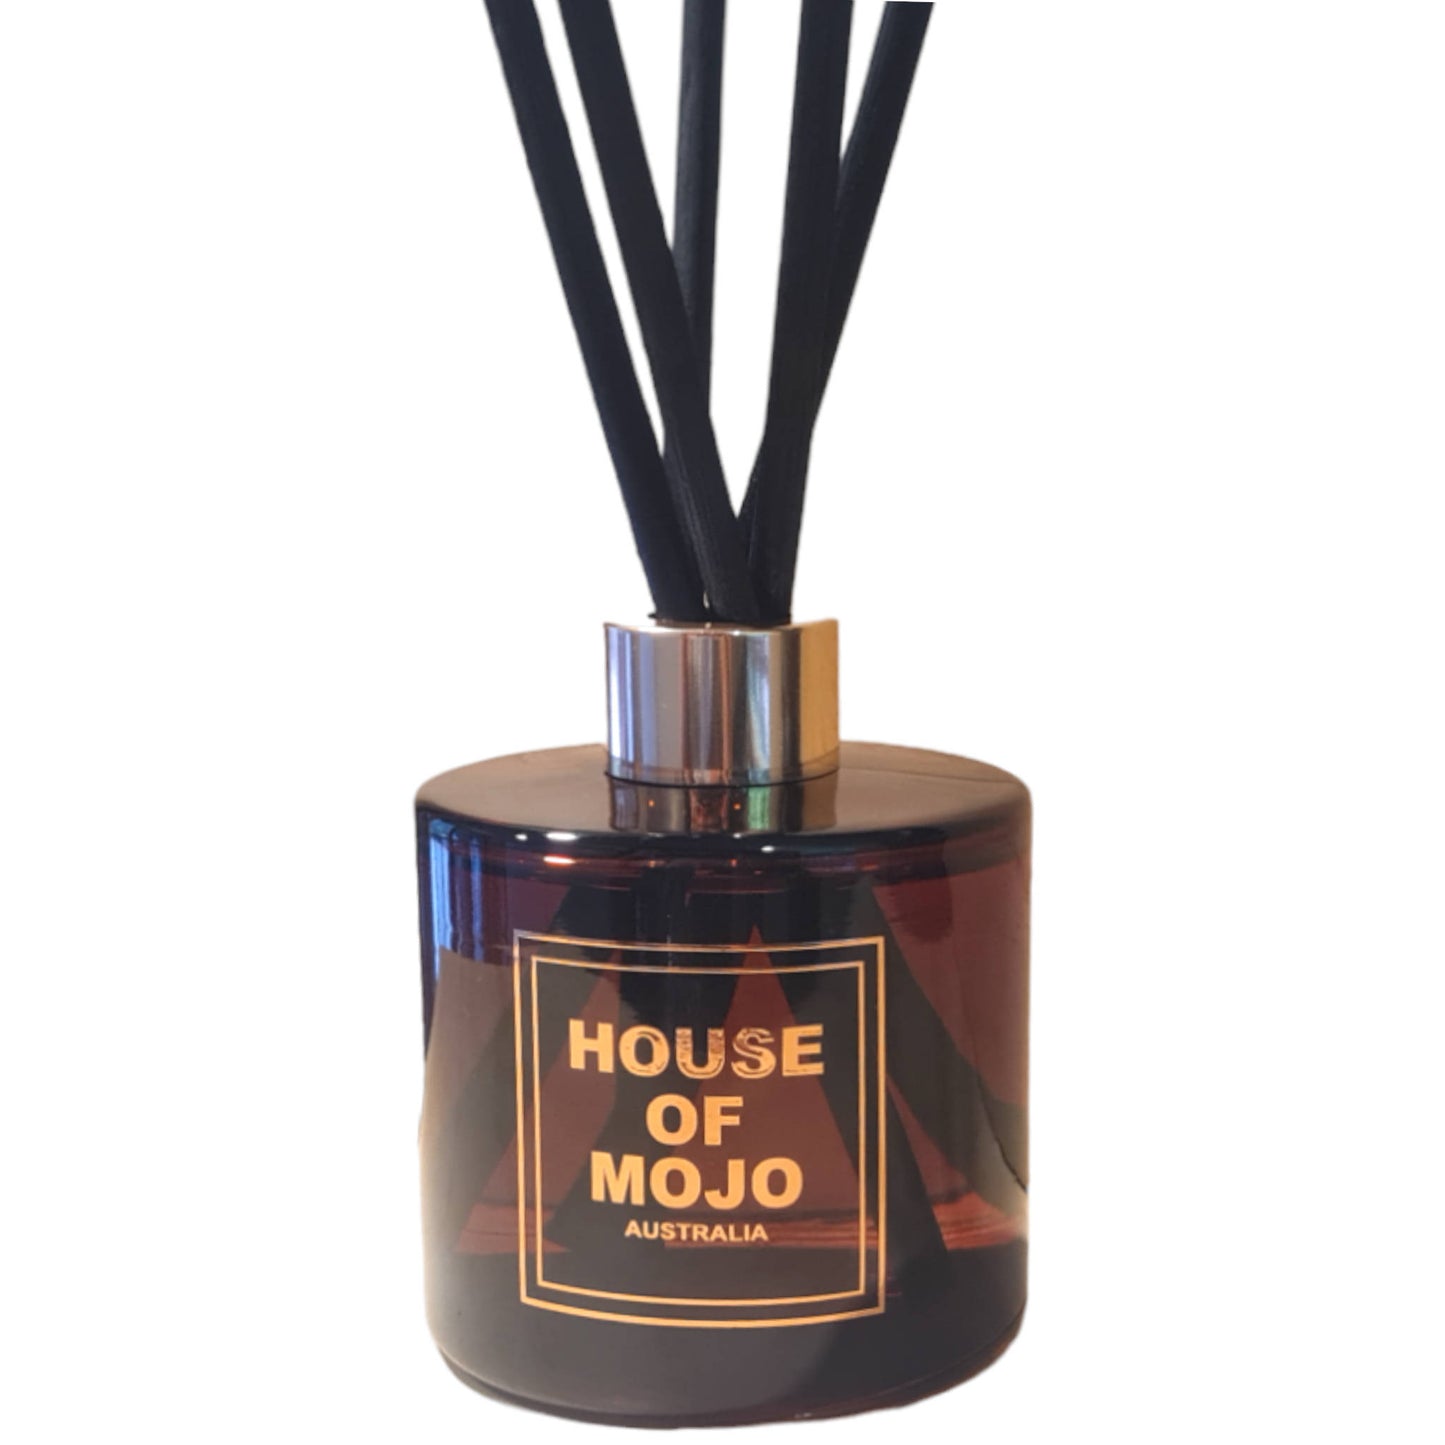 Deluxe Reed Aroma Diffuser - Mojo's Tropical Limes & Lemongrass